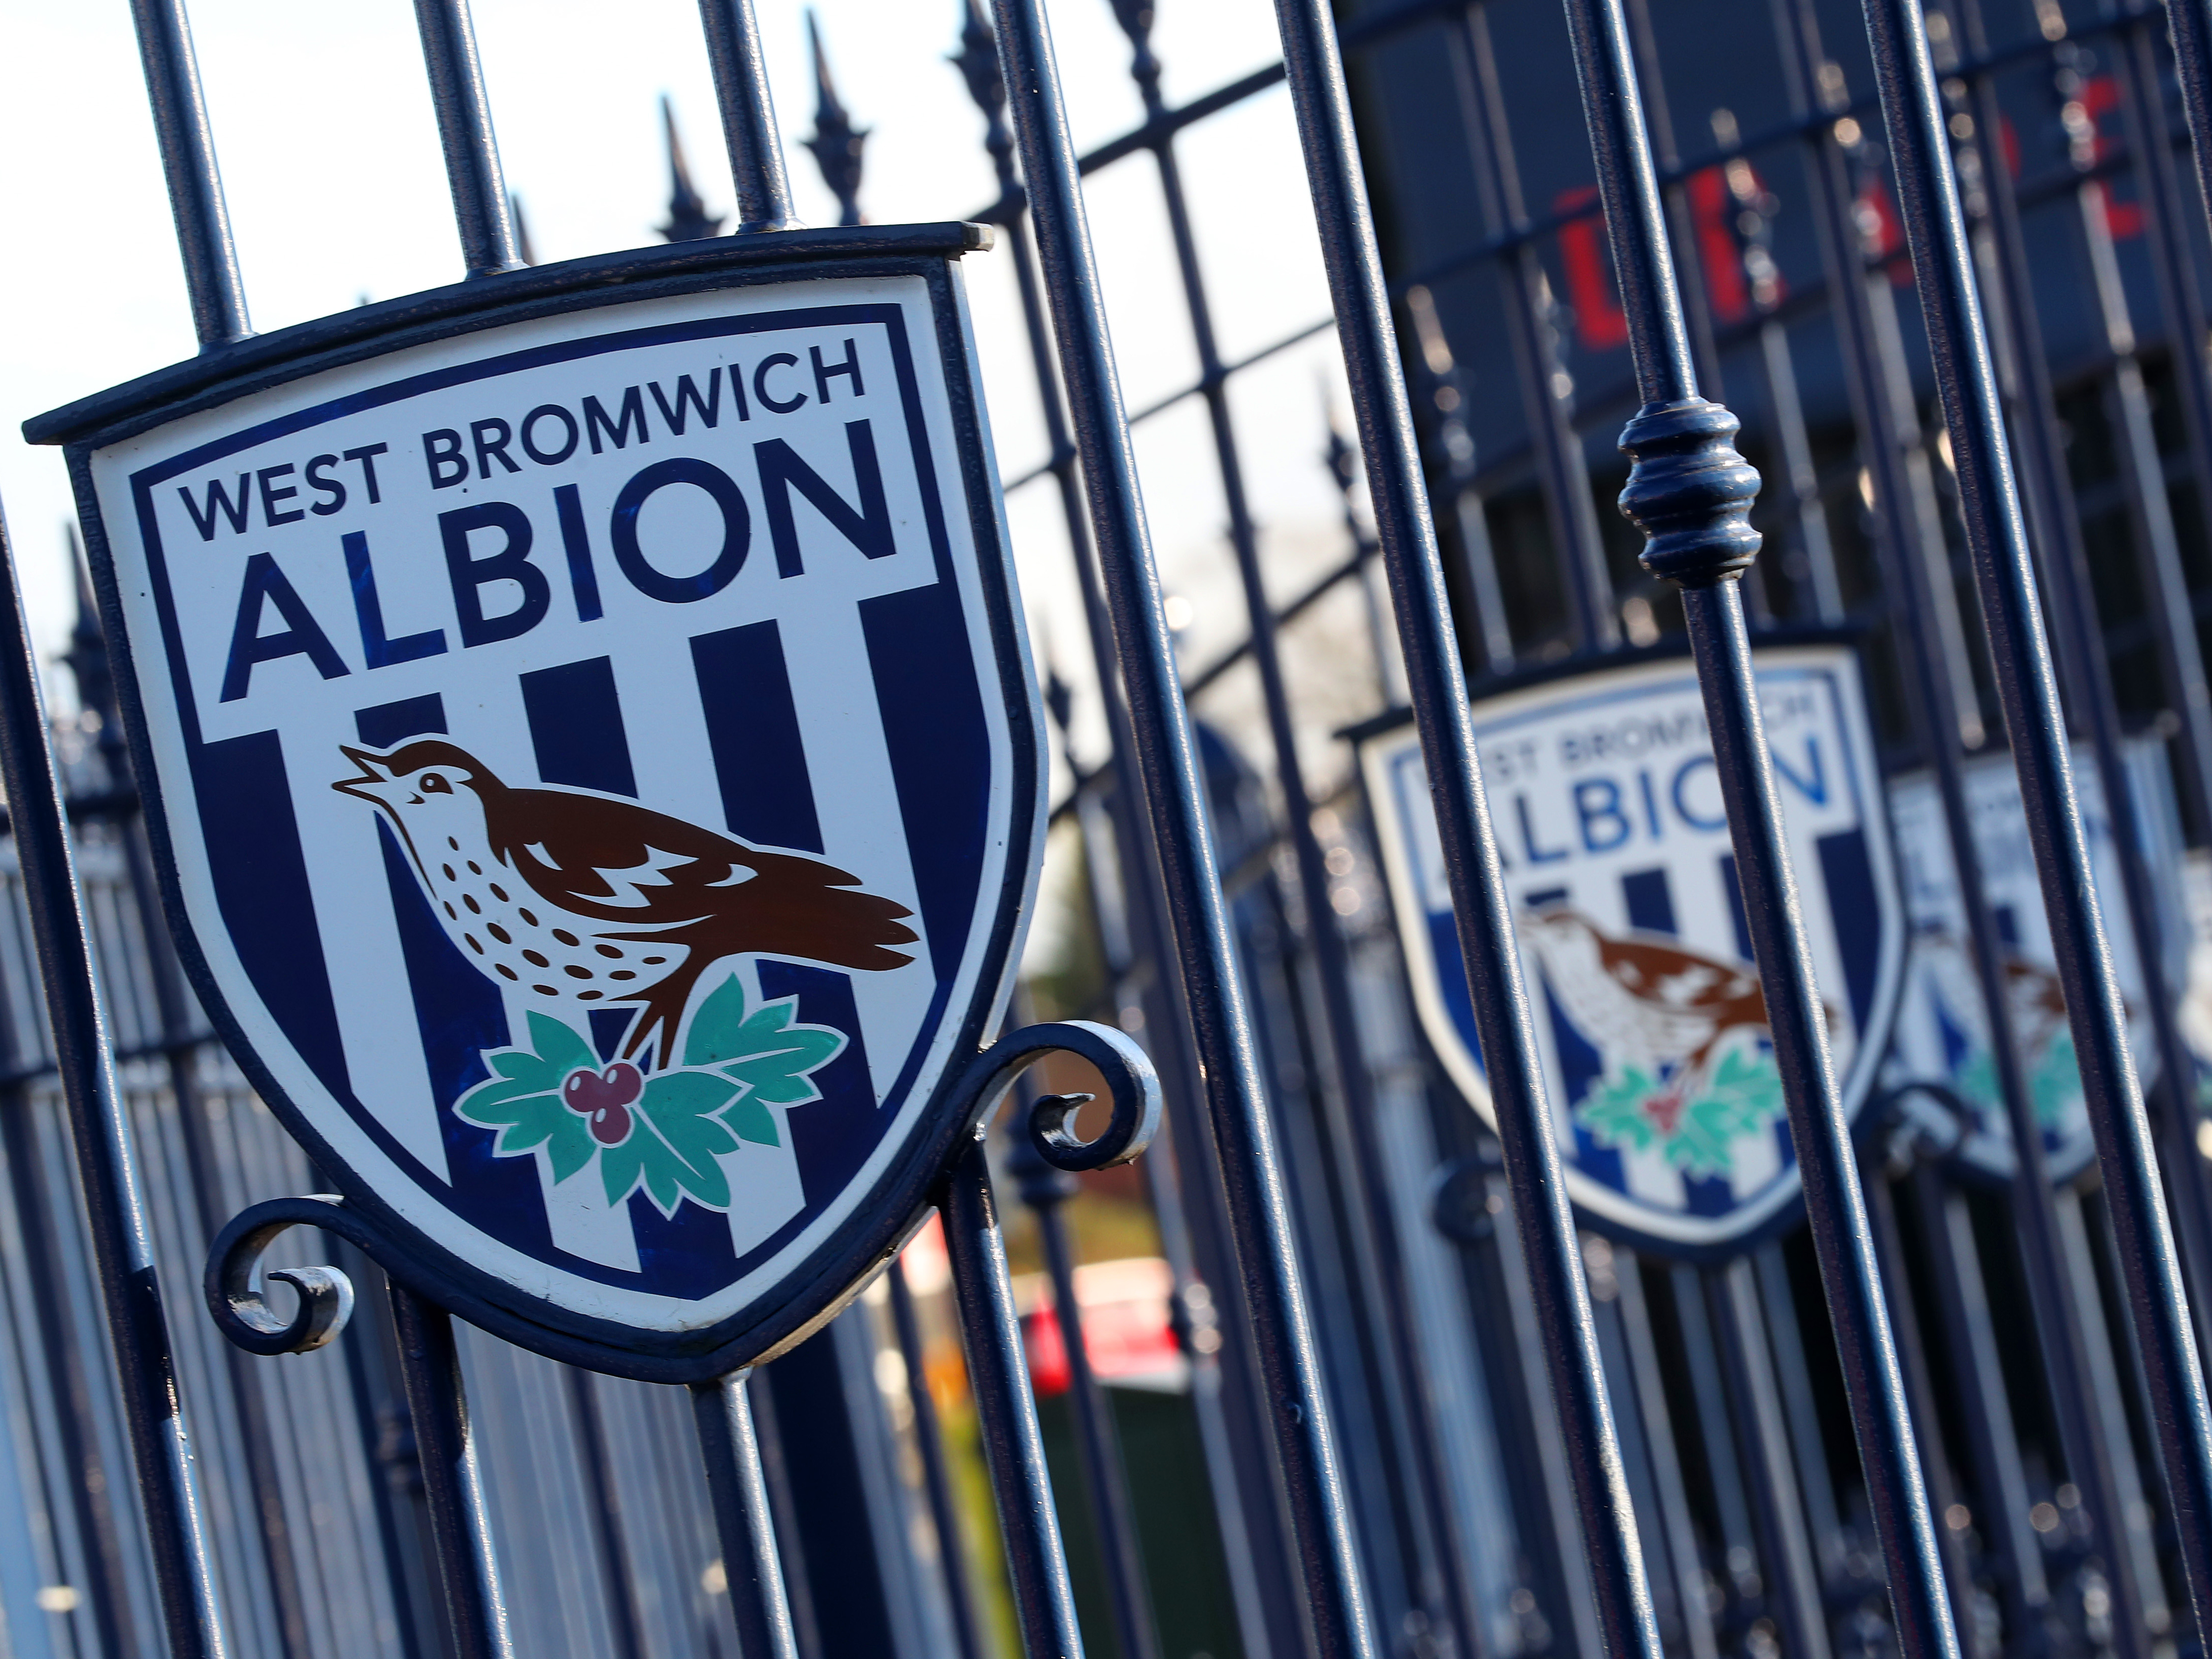 An image of an Albion badge outside The Hawthorns